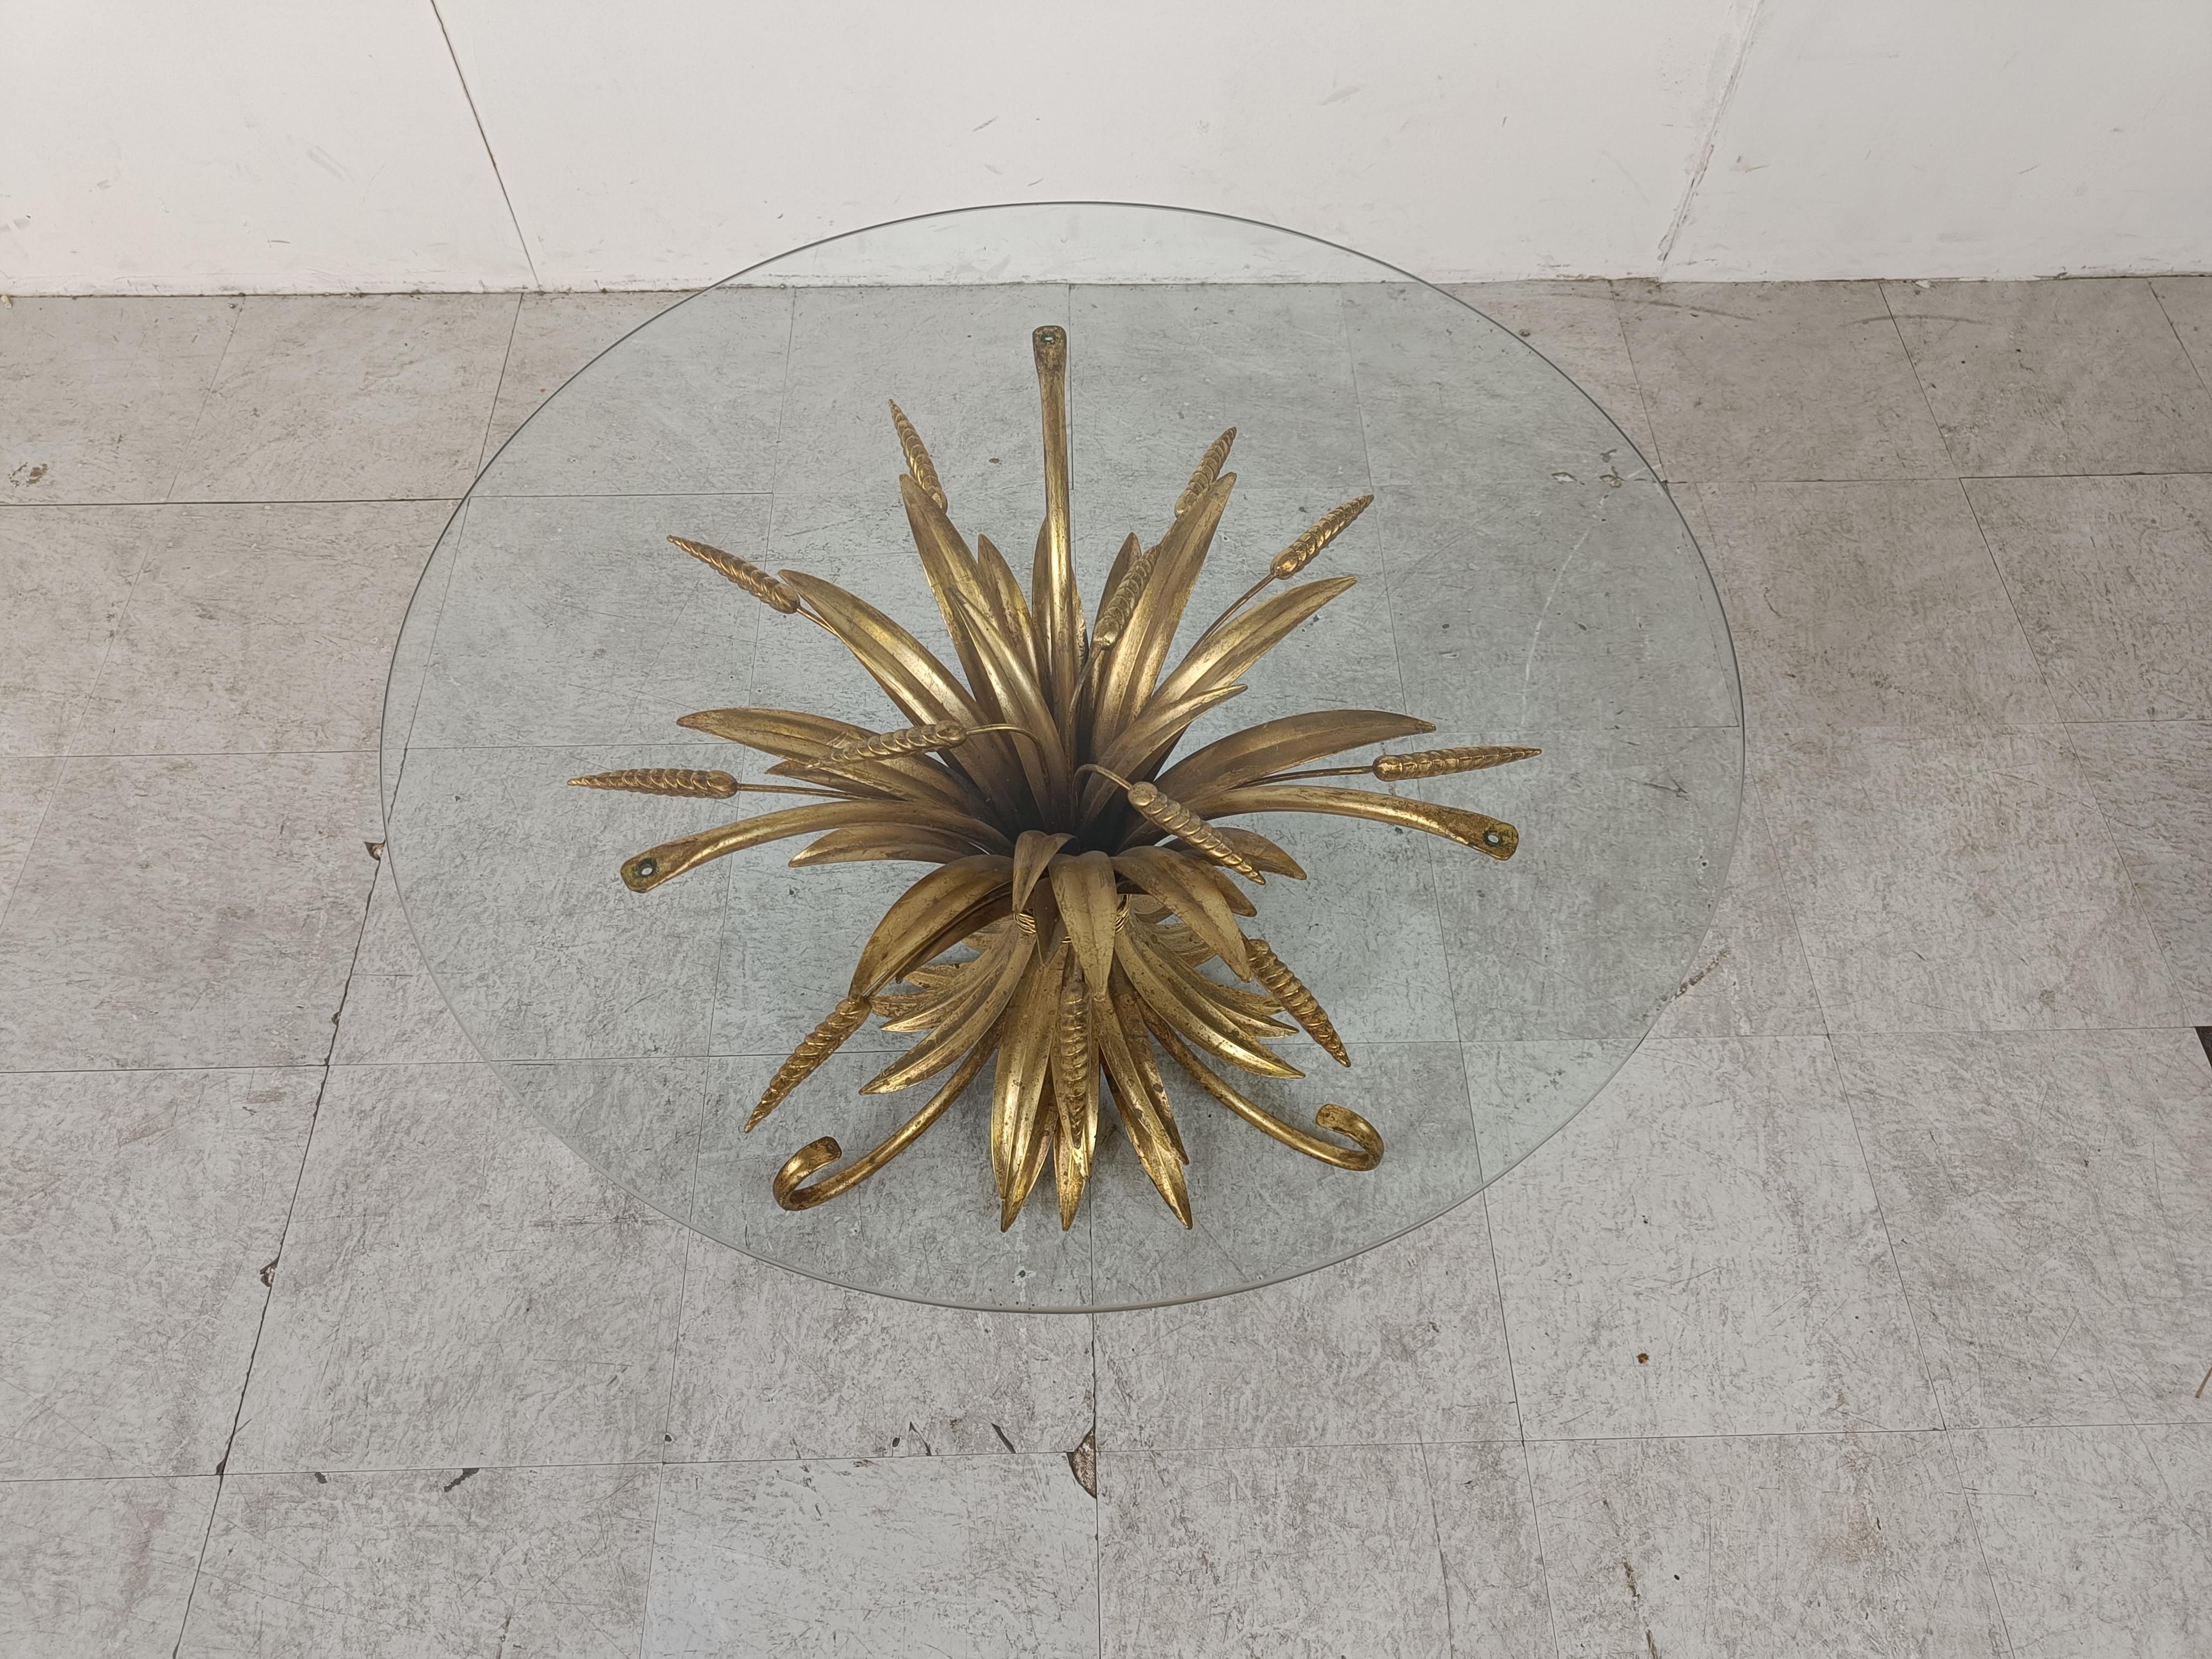 Vintage Coco Chanel coffee table or side table

The table is named after the famous fashion queen Gabrielle Bonheur Chanel.

Made of gilt metal with a round glass top.

The table is in very good vintage condition beautiful patina.

1960's -